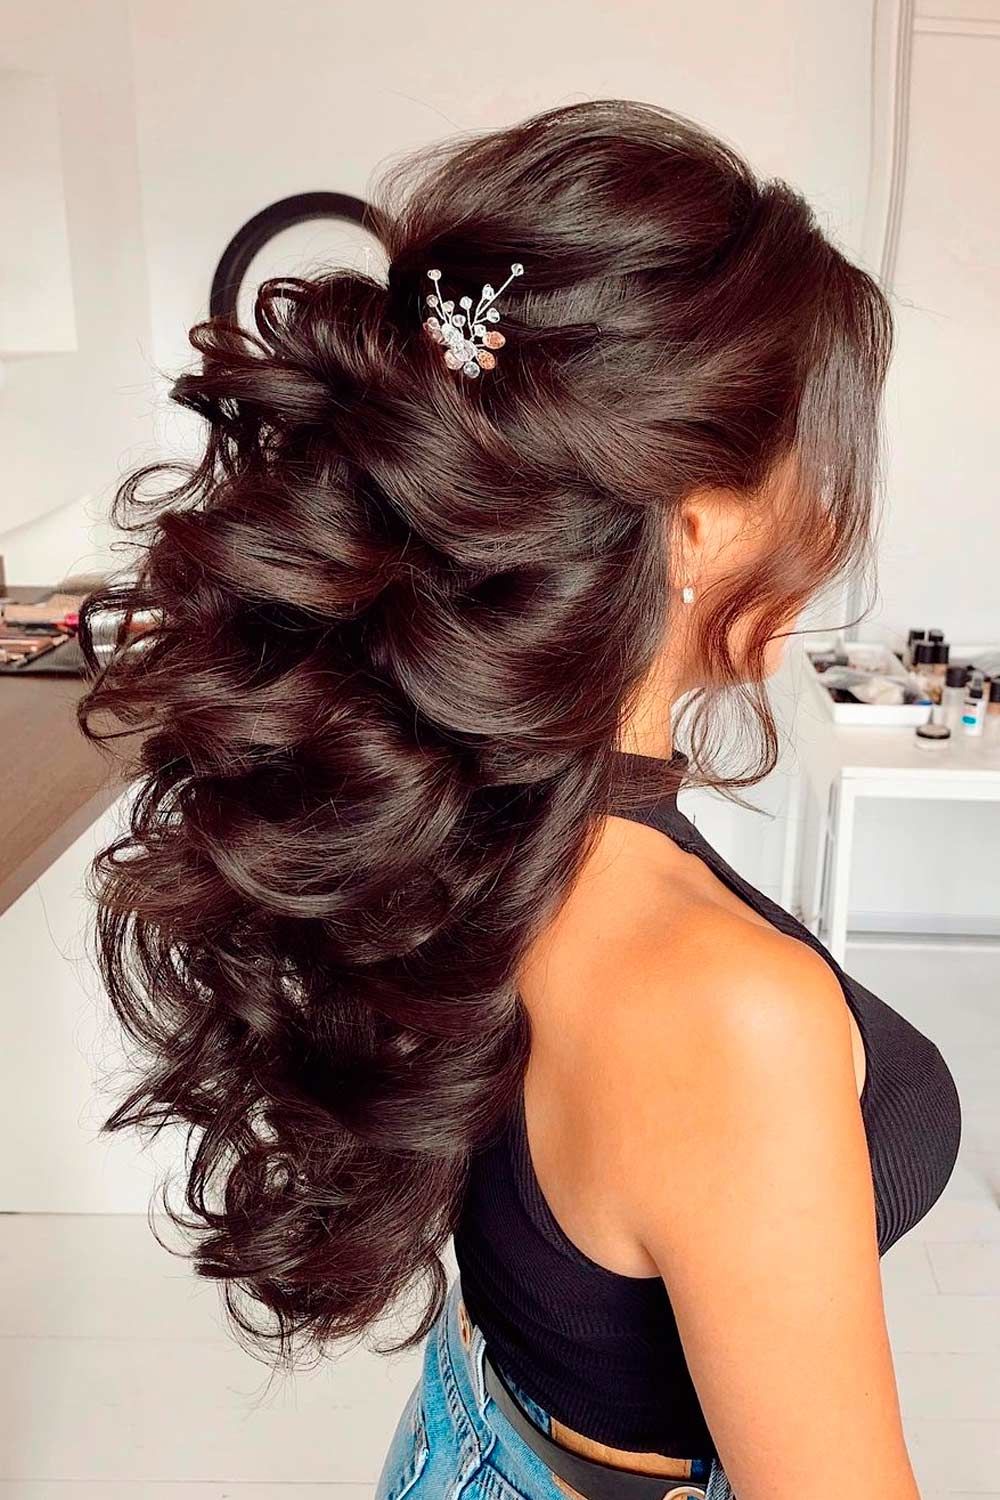 Glamorous prom hairstyles for thin hair - the secret is in the volume